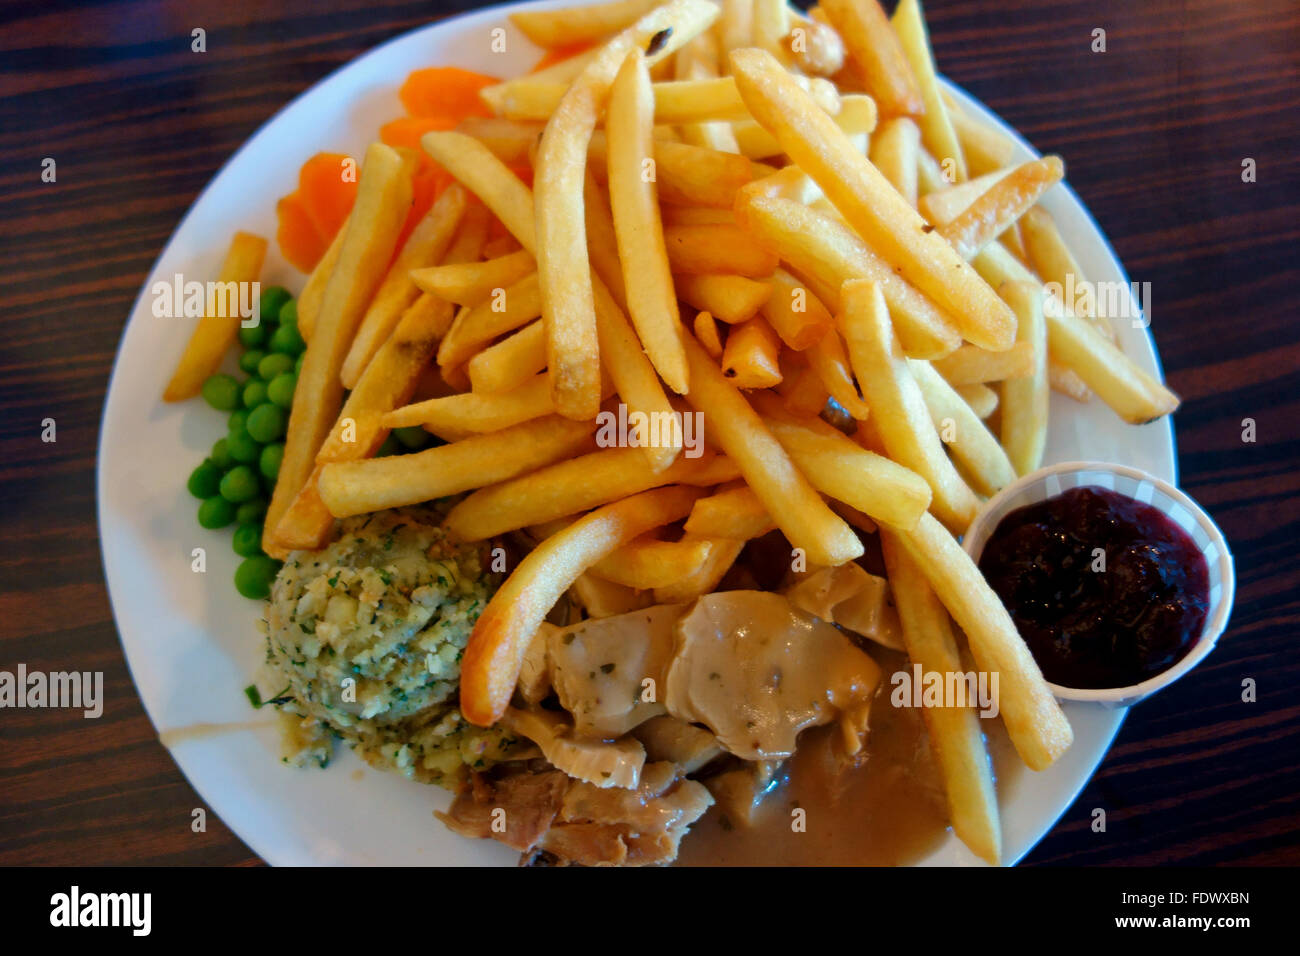 A turkey dinner served in a restaurant Stock Photo